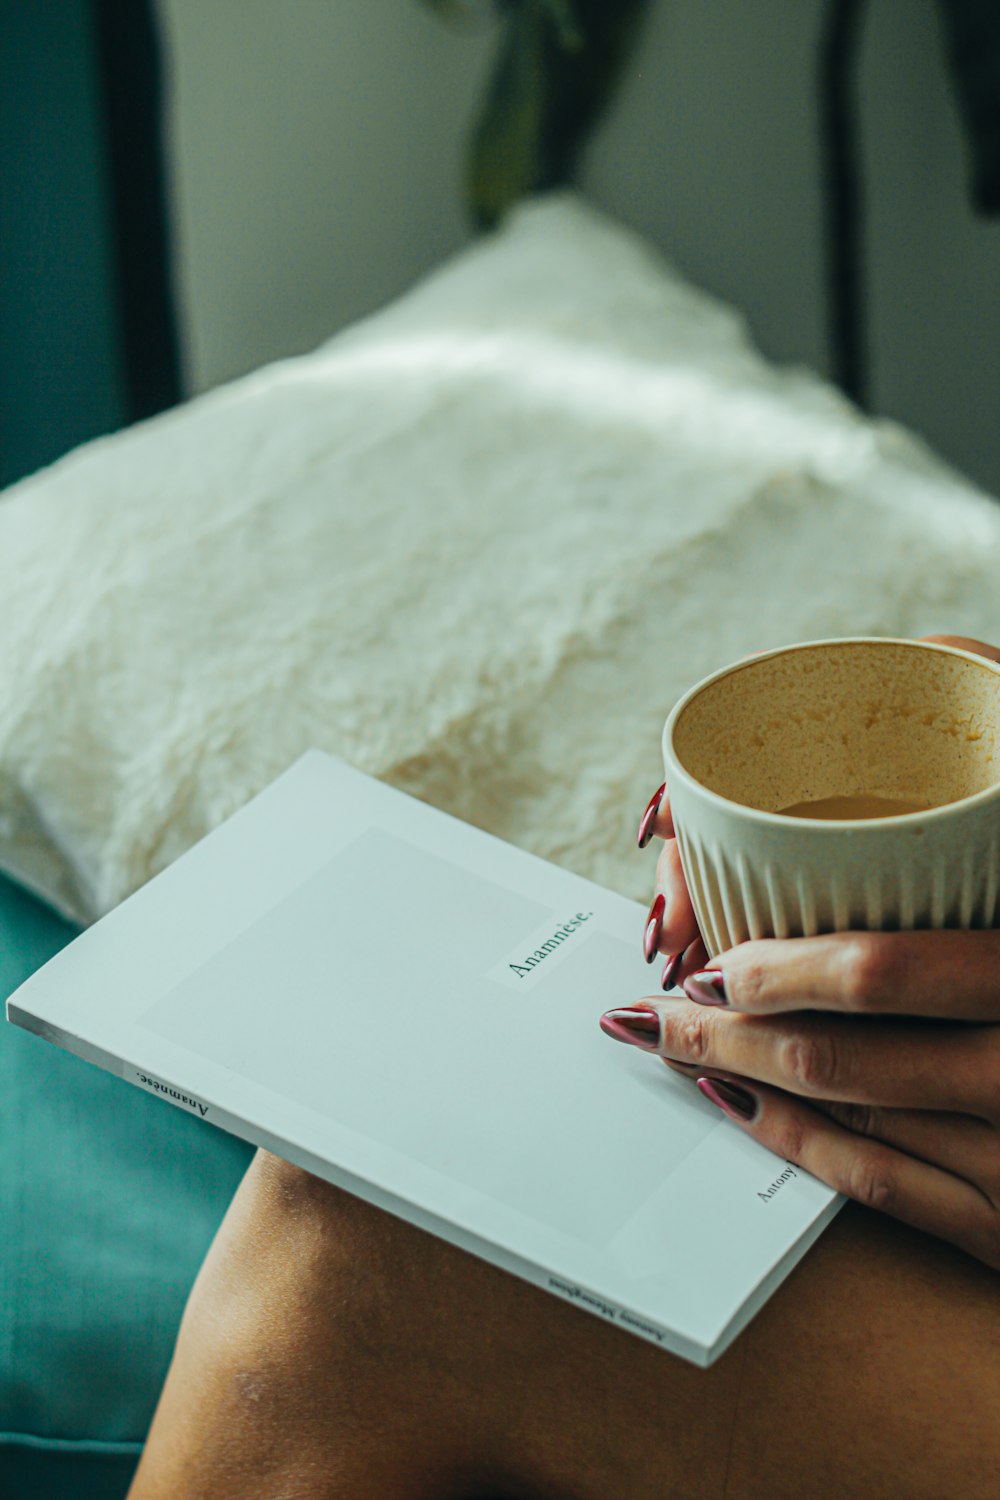 a woman sitting on a bed holding a cup of coffee